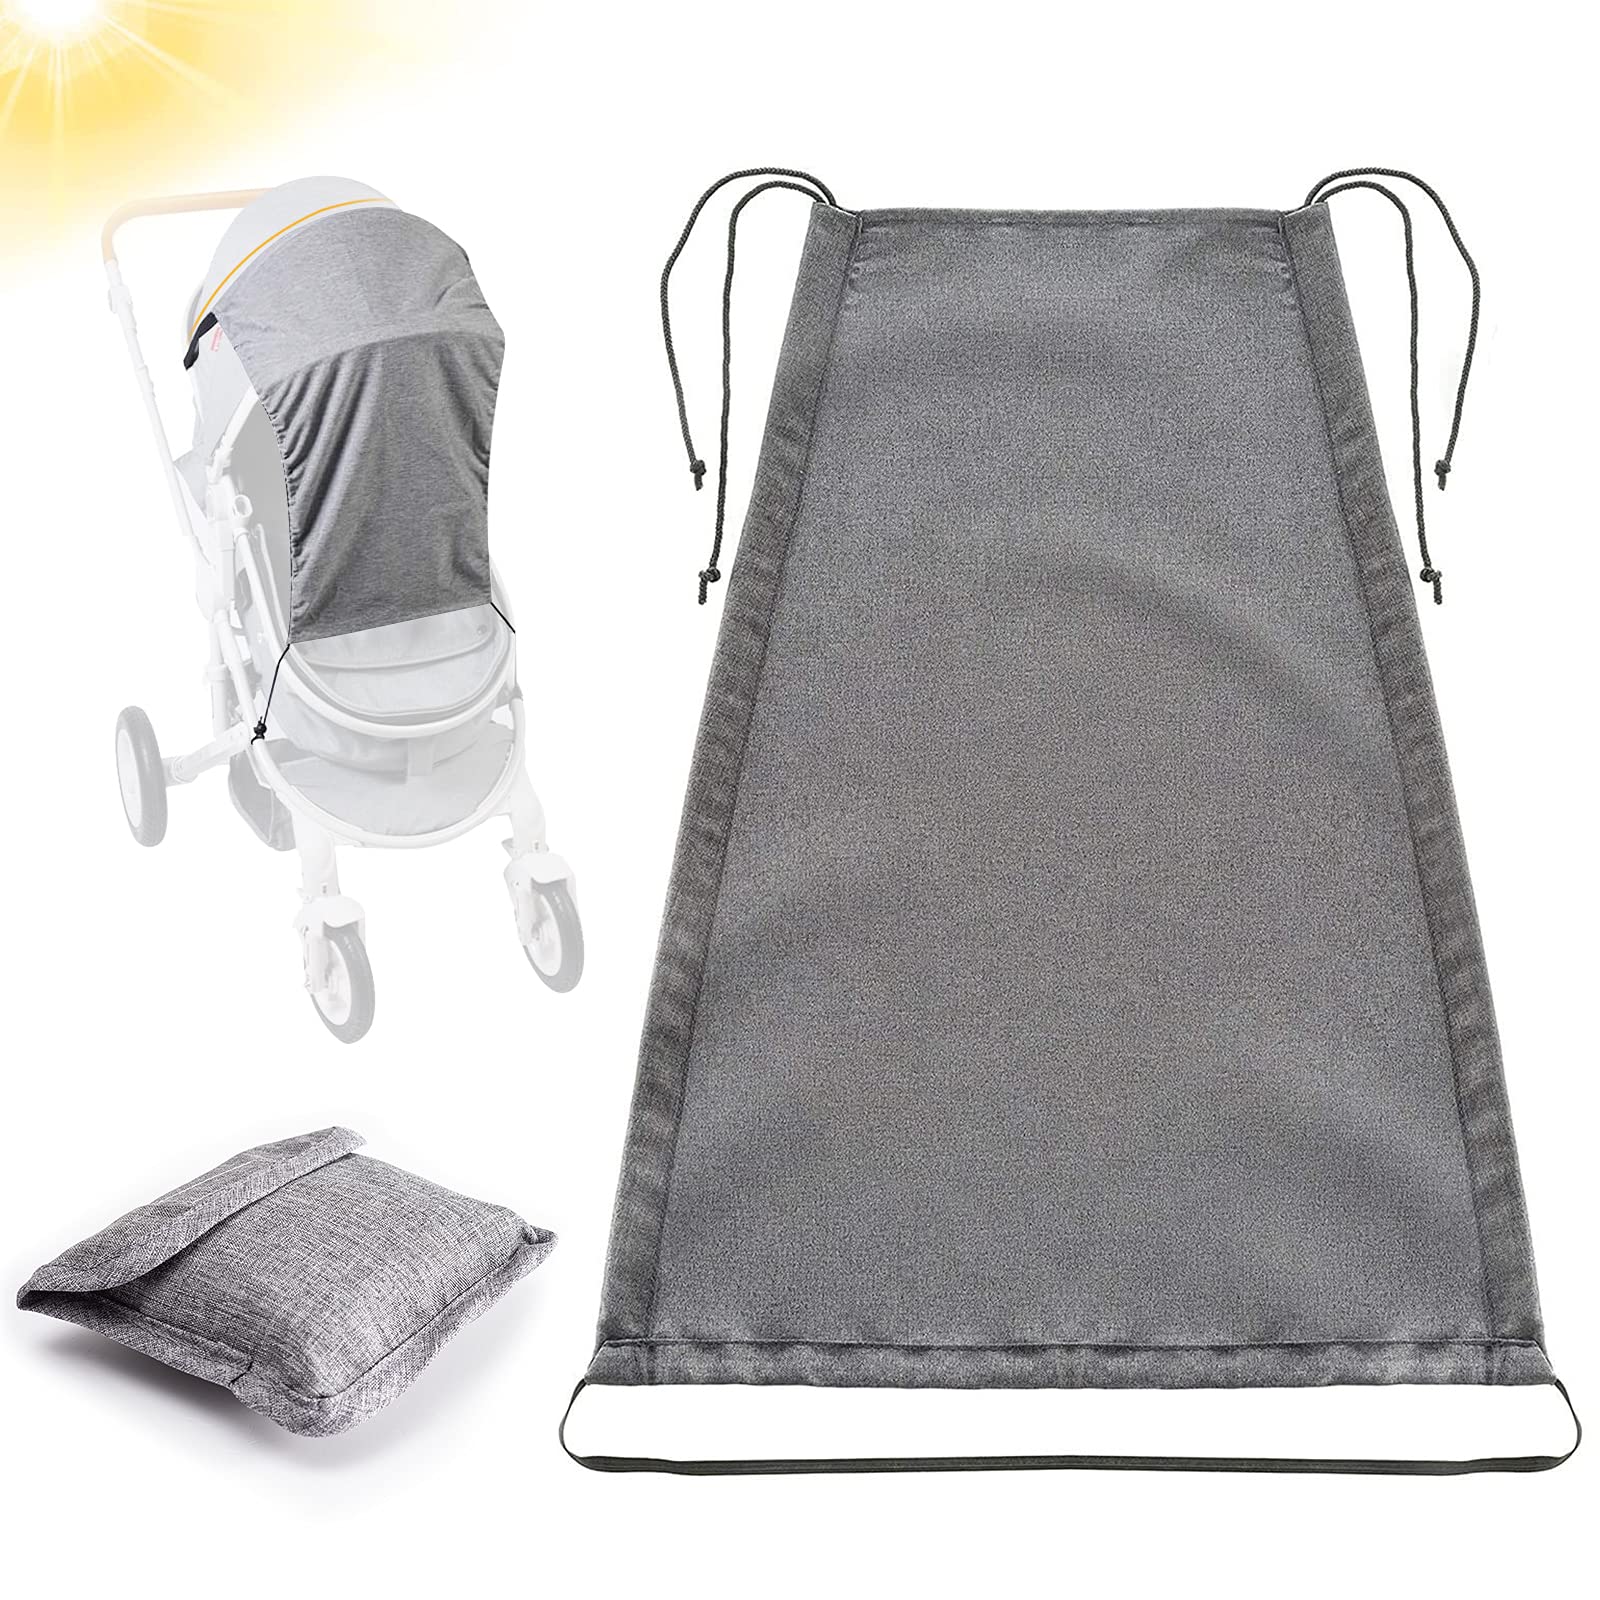 Universal Sun Shade for Pram,Baby Stroller Sun Cover, Pushchair Sun Sail with UV Protection 50+,Baby Pram Sunshade for Pram,Pushchair, Buggy, Stroller and Carrycot